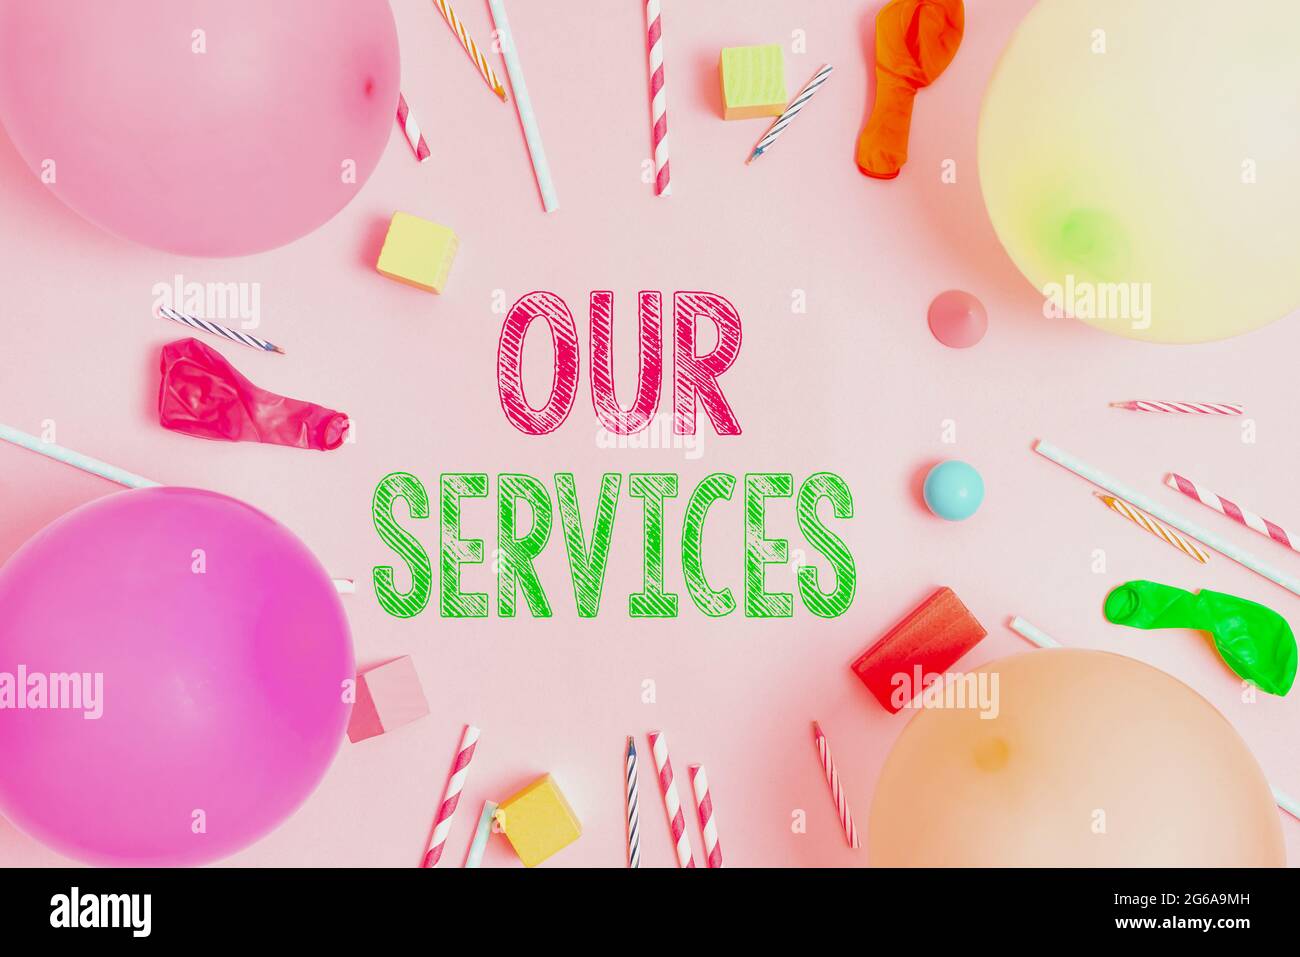 Conceptual display Our Services. Business approach The occupation or function of serving Intangible products Colorful Birthday Party Designs Bright Stock Photo